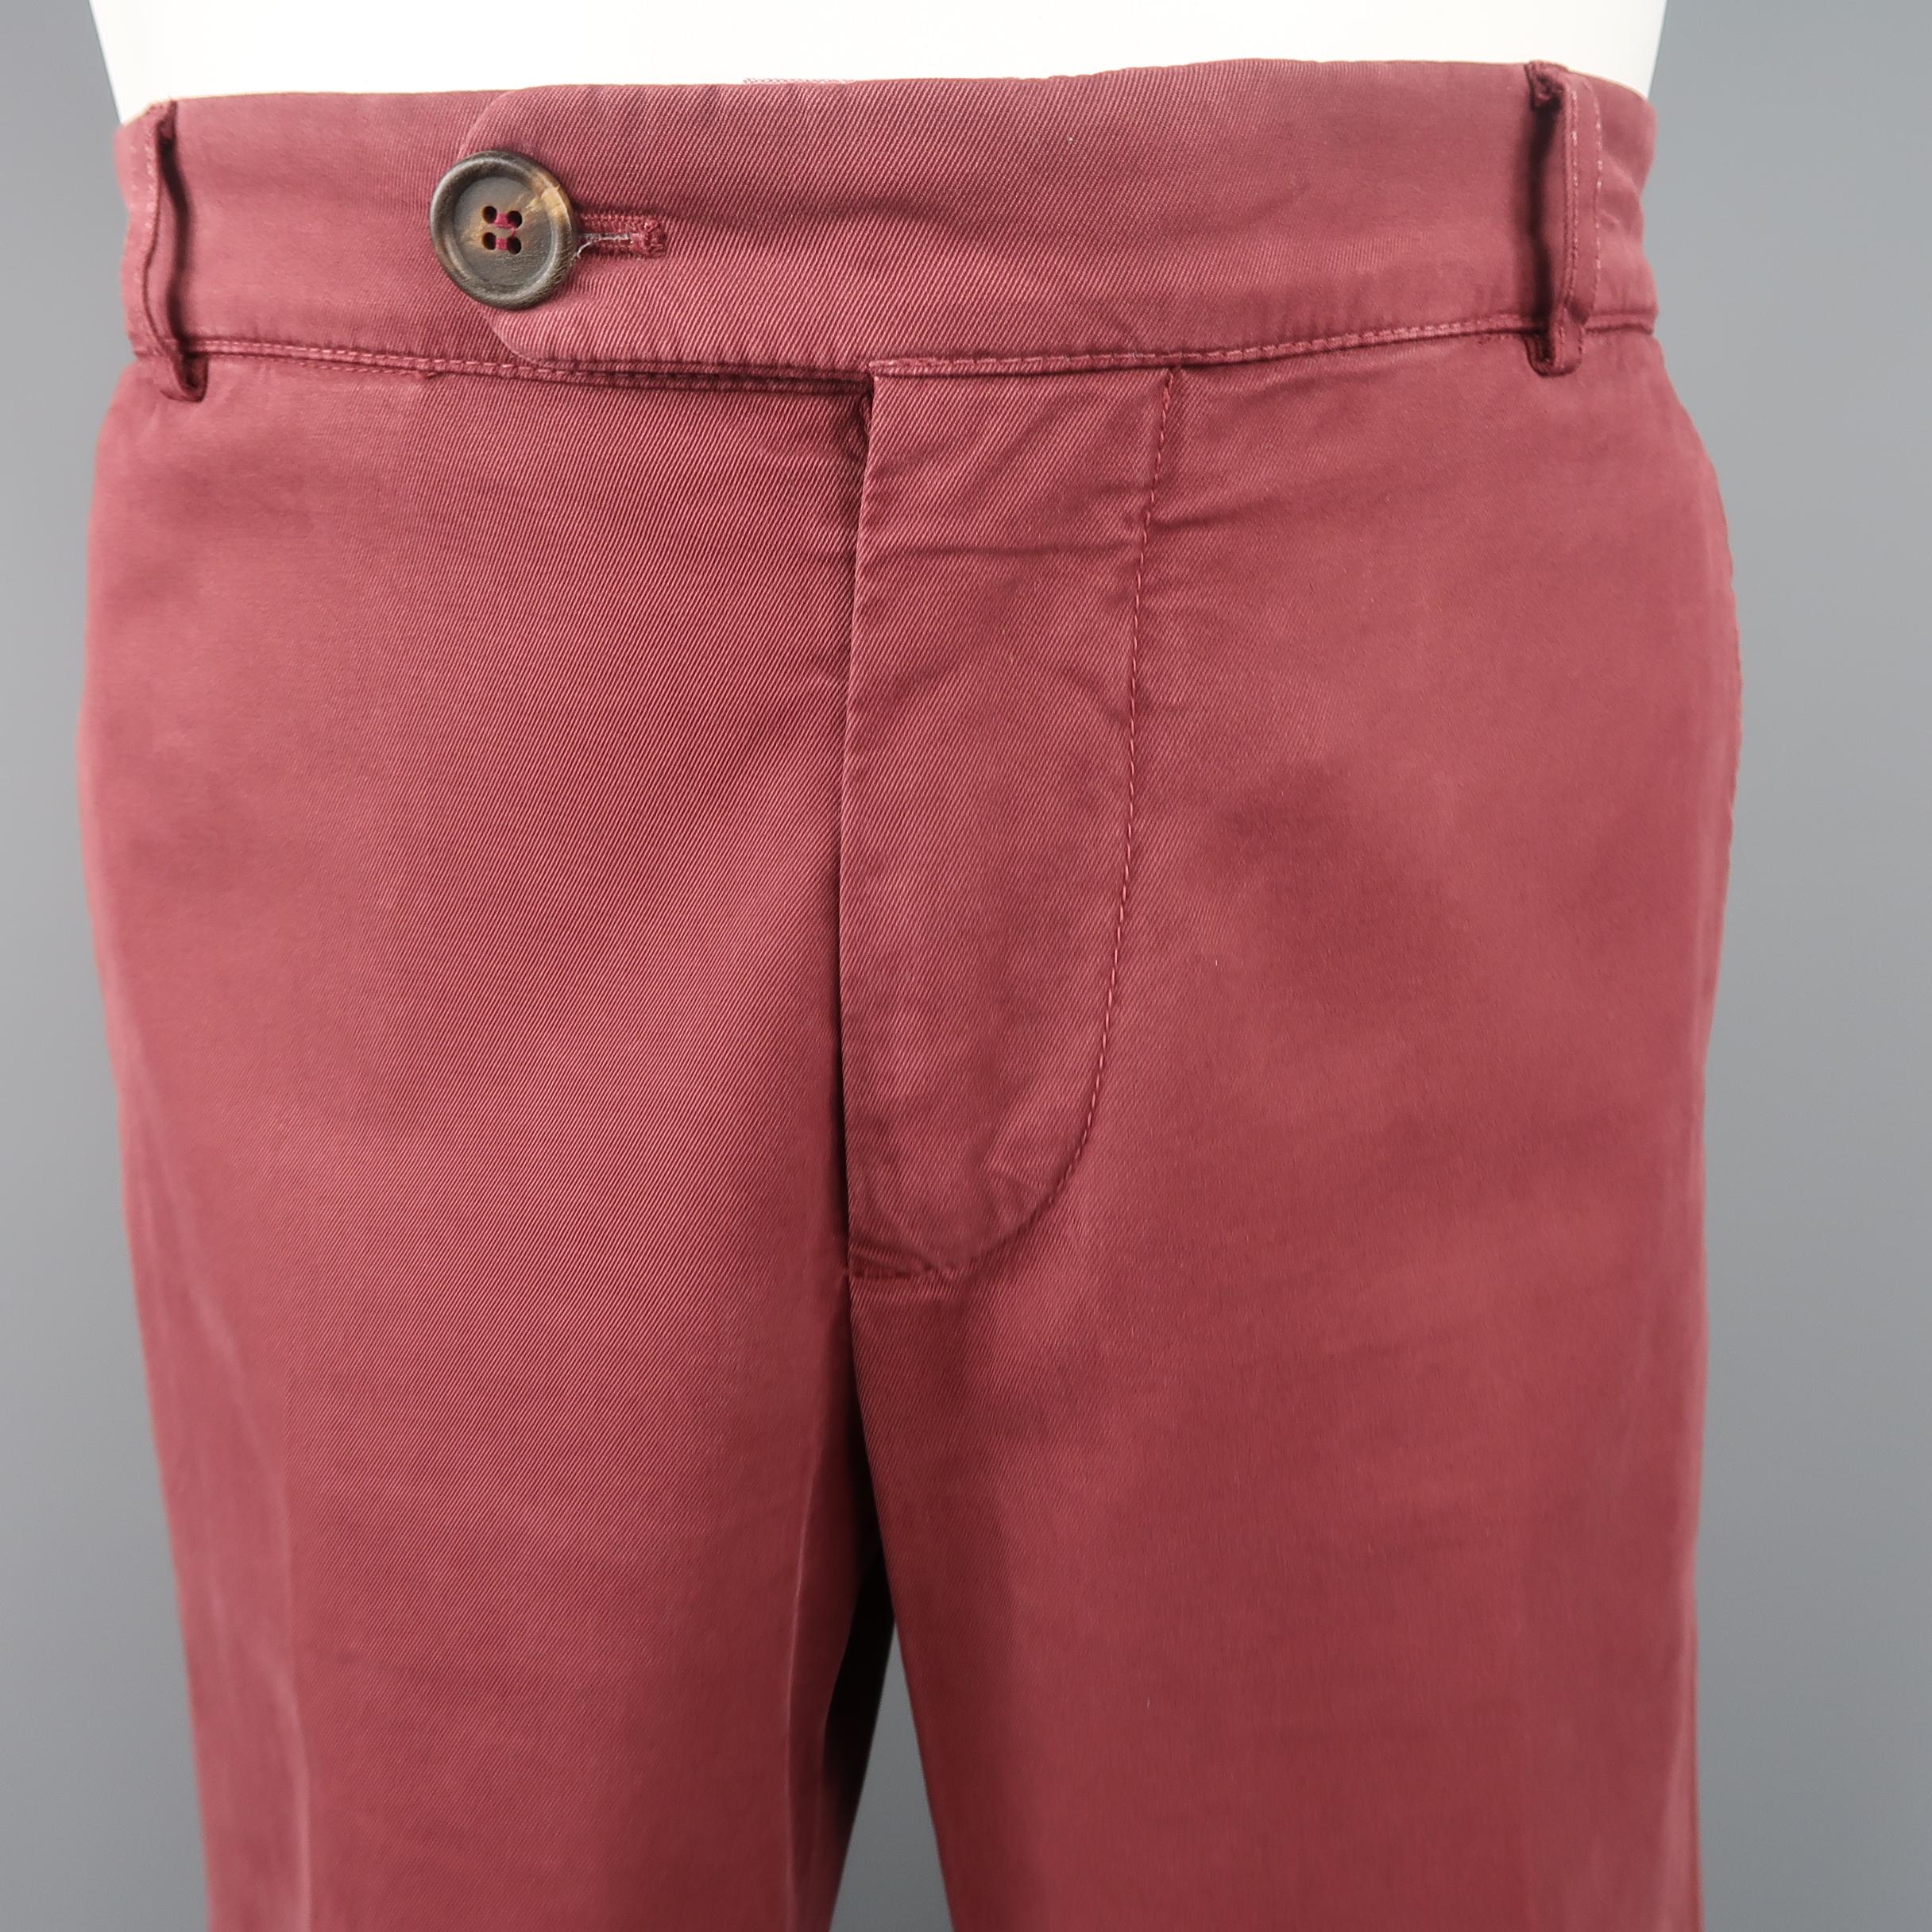 BRUNELLO CUCINELLI chinos come in a washed burgundy cotton twill with welt pockets, and a tab closure waistband. Made in Italy.
 
Excellent Pre-Owned Condition.
Marked: IT 50
 
Measurements:
 
Waist: 34 in.
Rise: 9.5 in.
Inseam:  34 in.